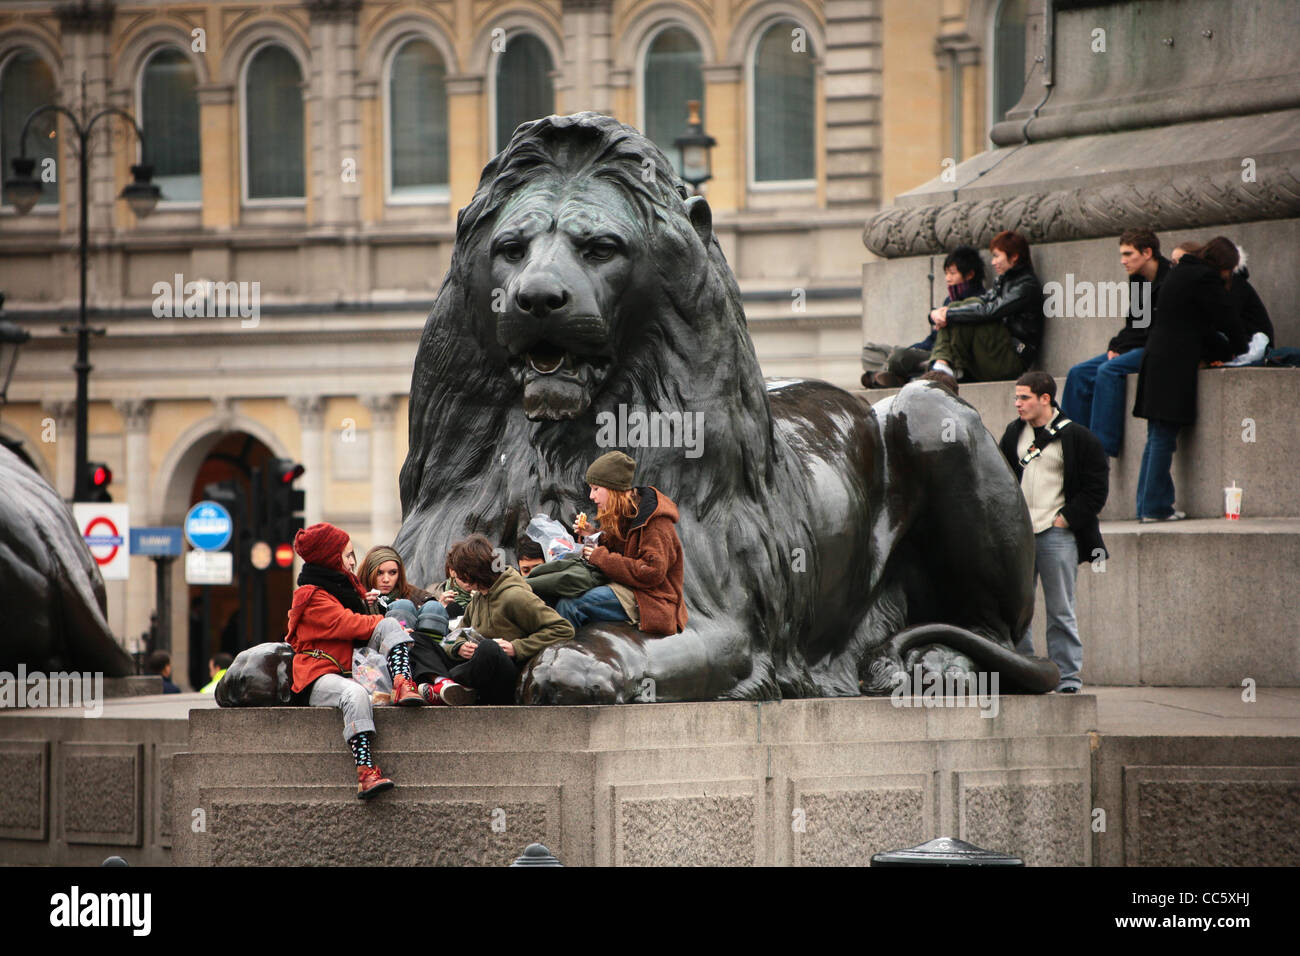 A family enjoys a picnic on one of the famous landmarks, one of the Lion statues in Trafalgar Square, London, England. Stock Photo